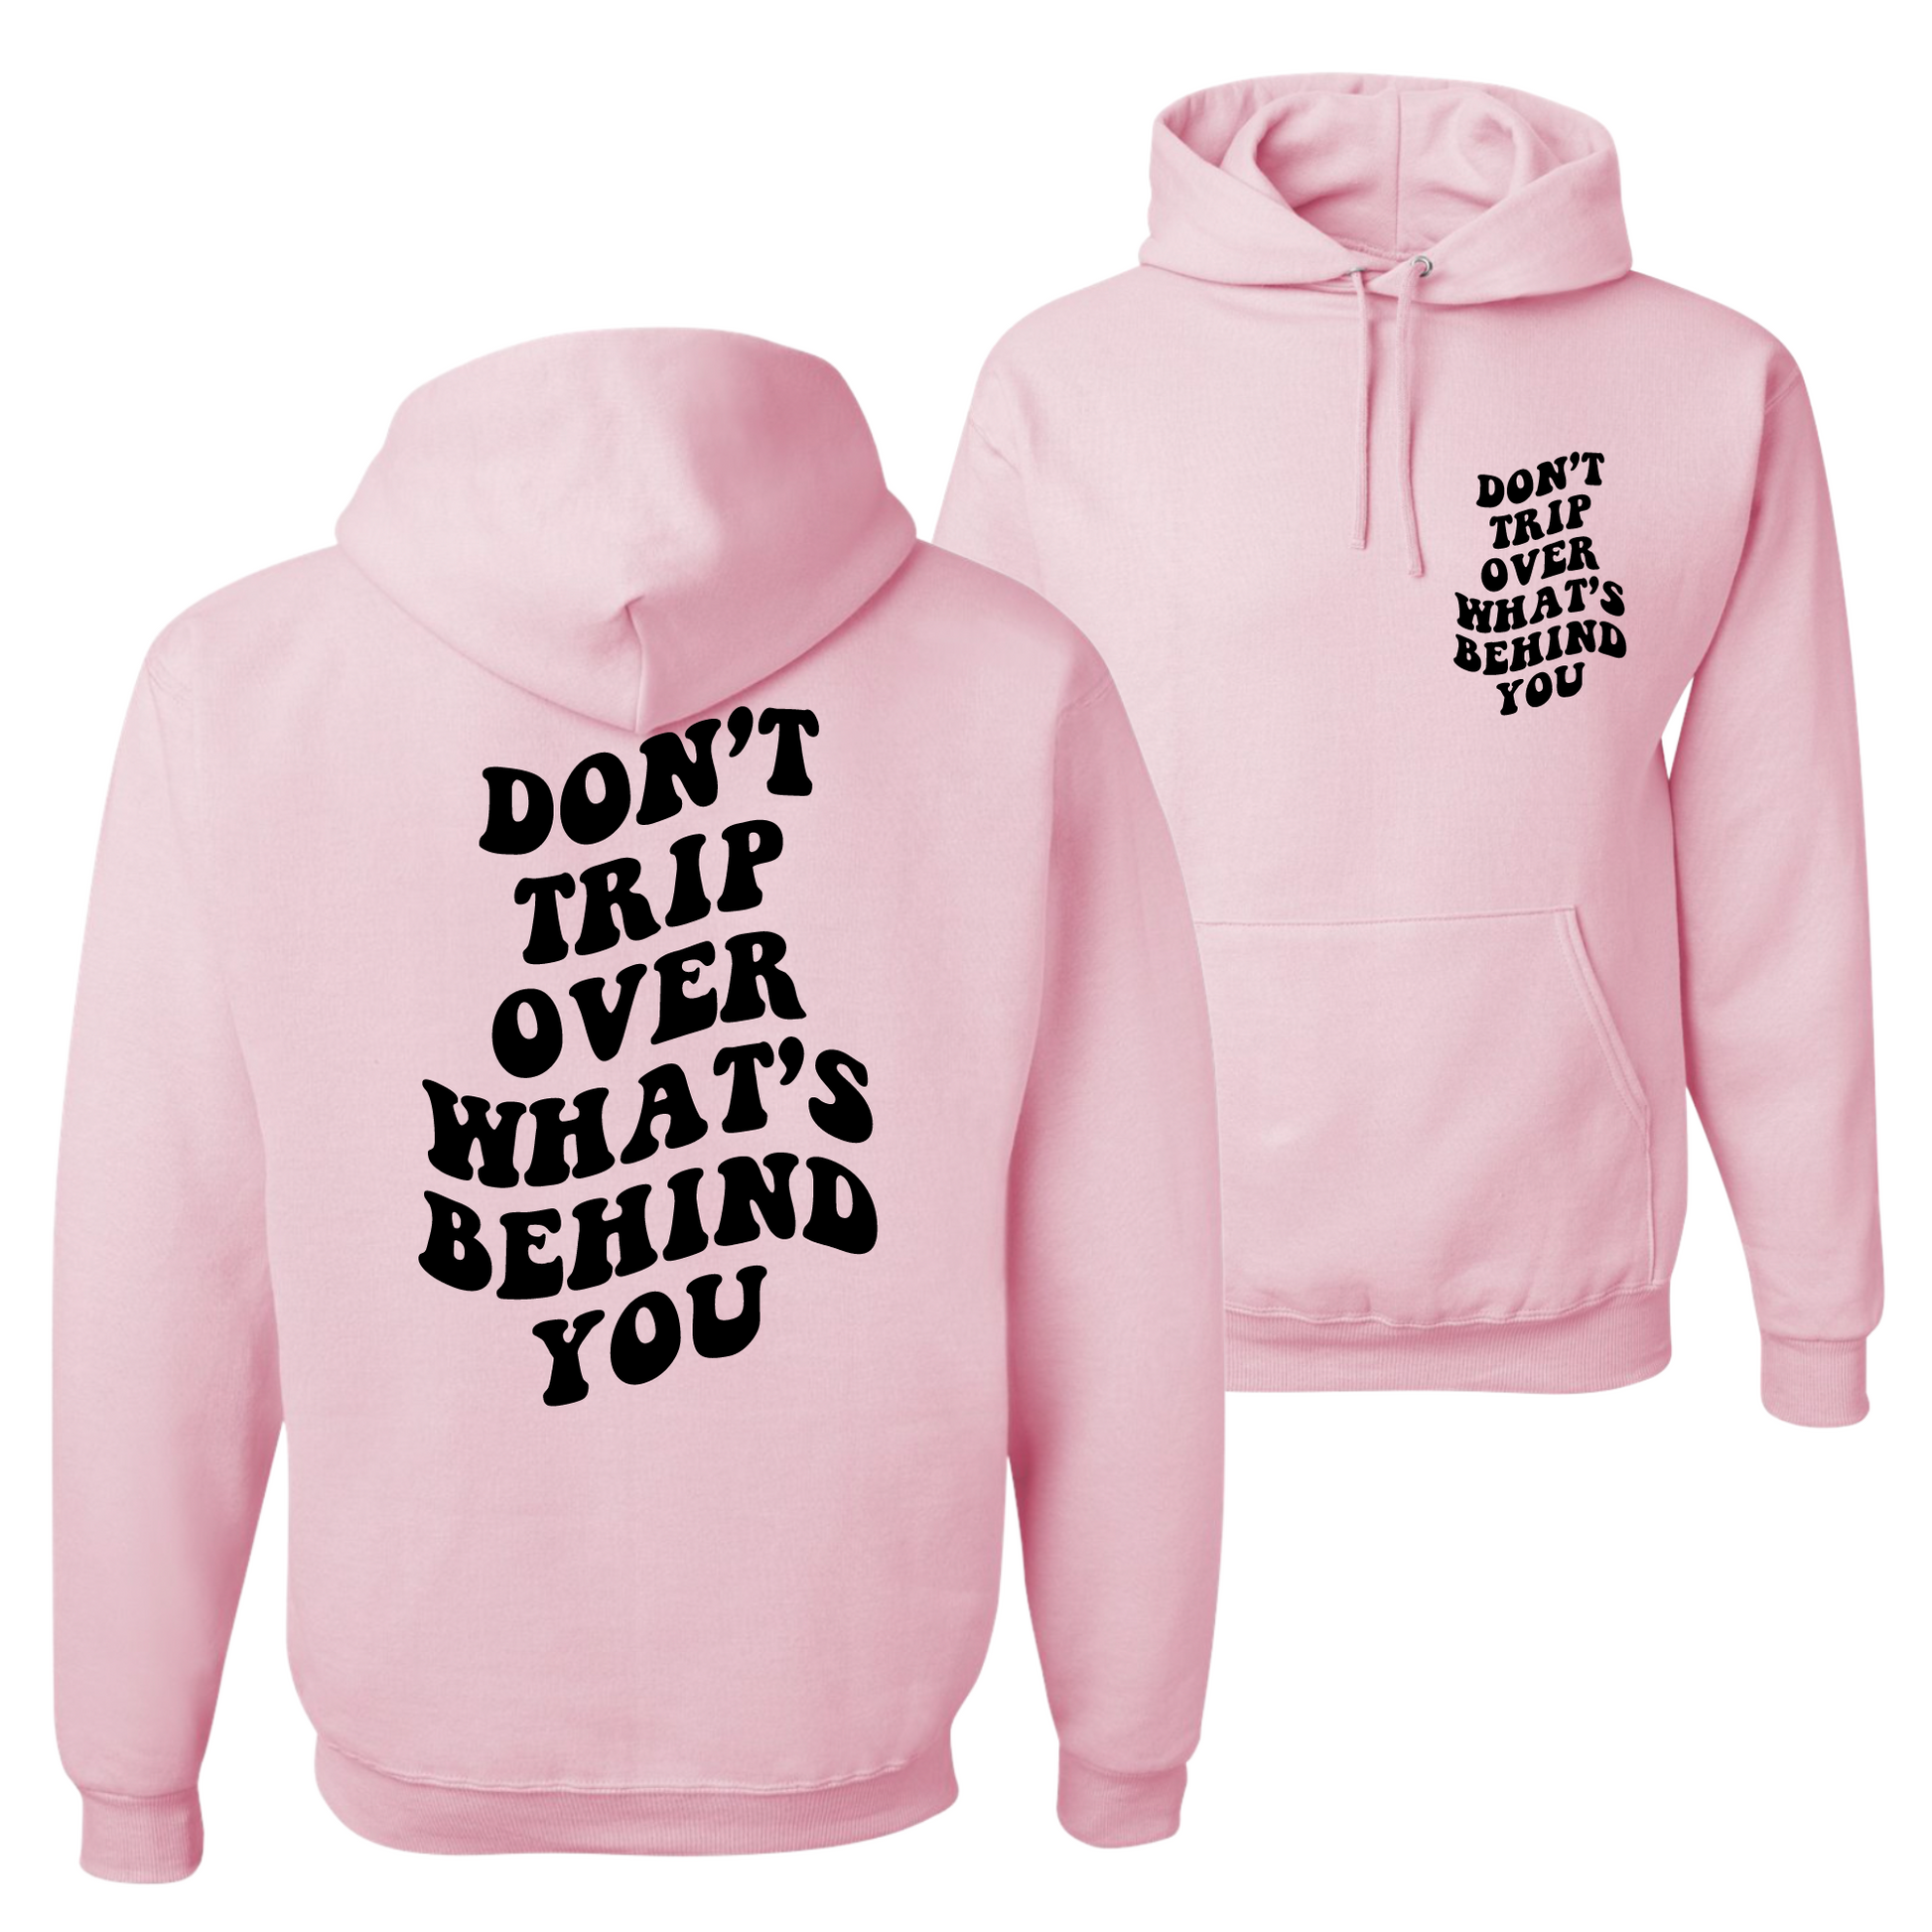 Resiliently Bold Don't Trip Over What's Behind You Classic Pink Hooded Sweatshirt